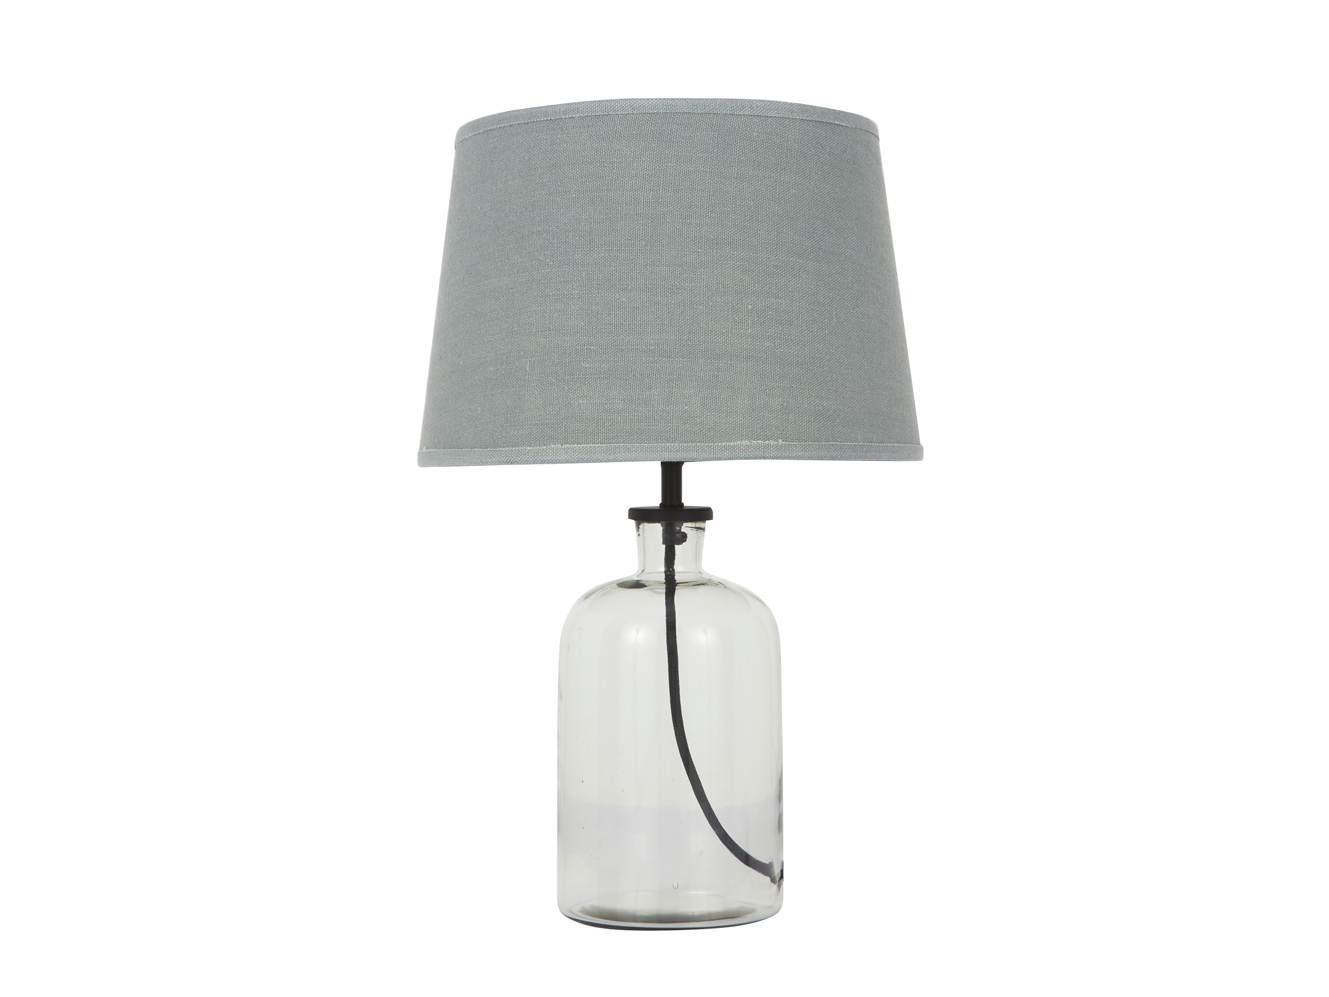 Small Apothecary Table Lamp With Natural Hessian Shade regarding sizing 1329 X 997